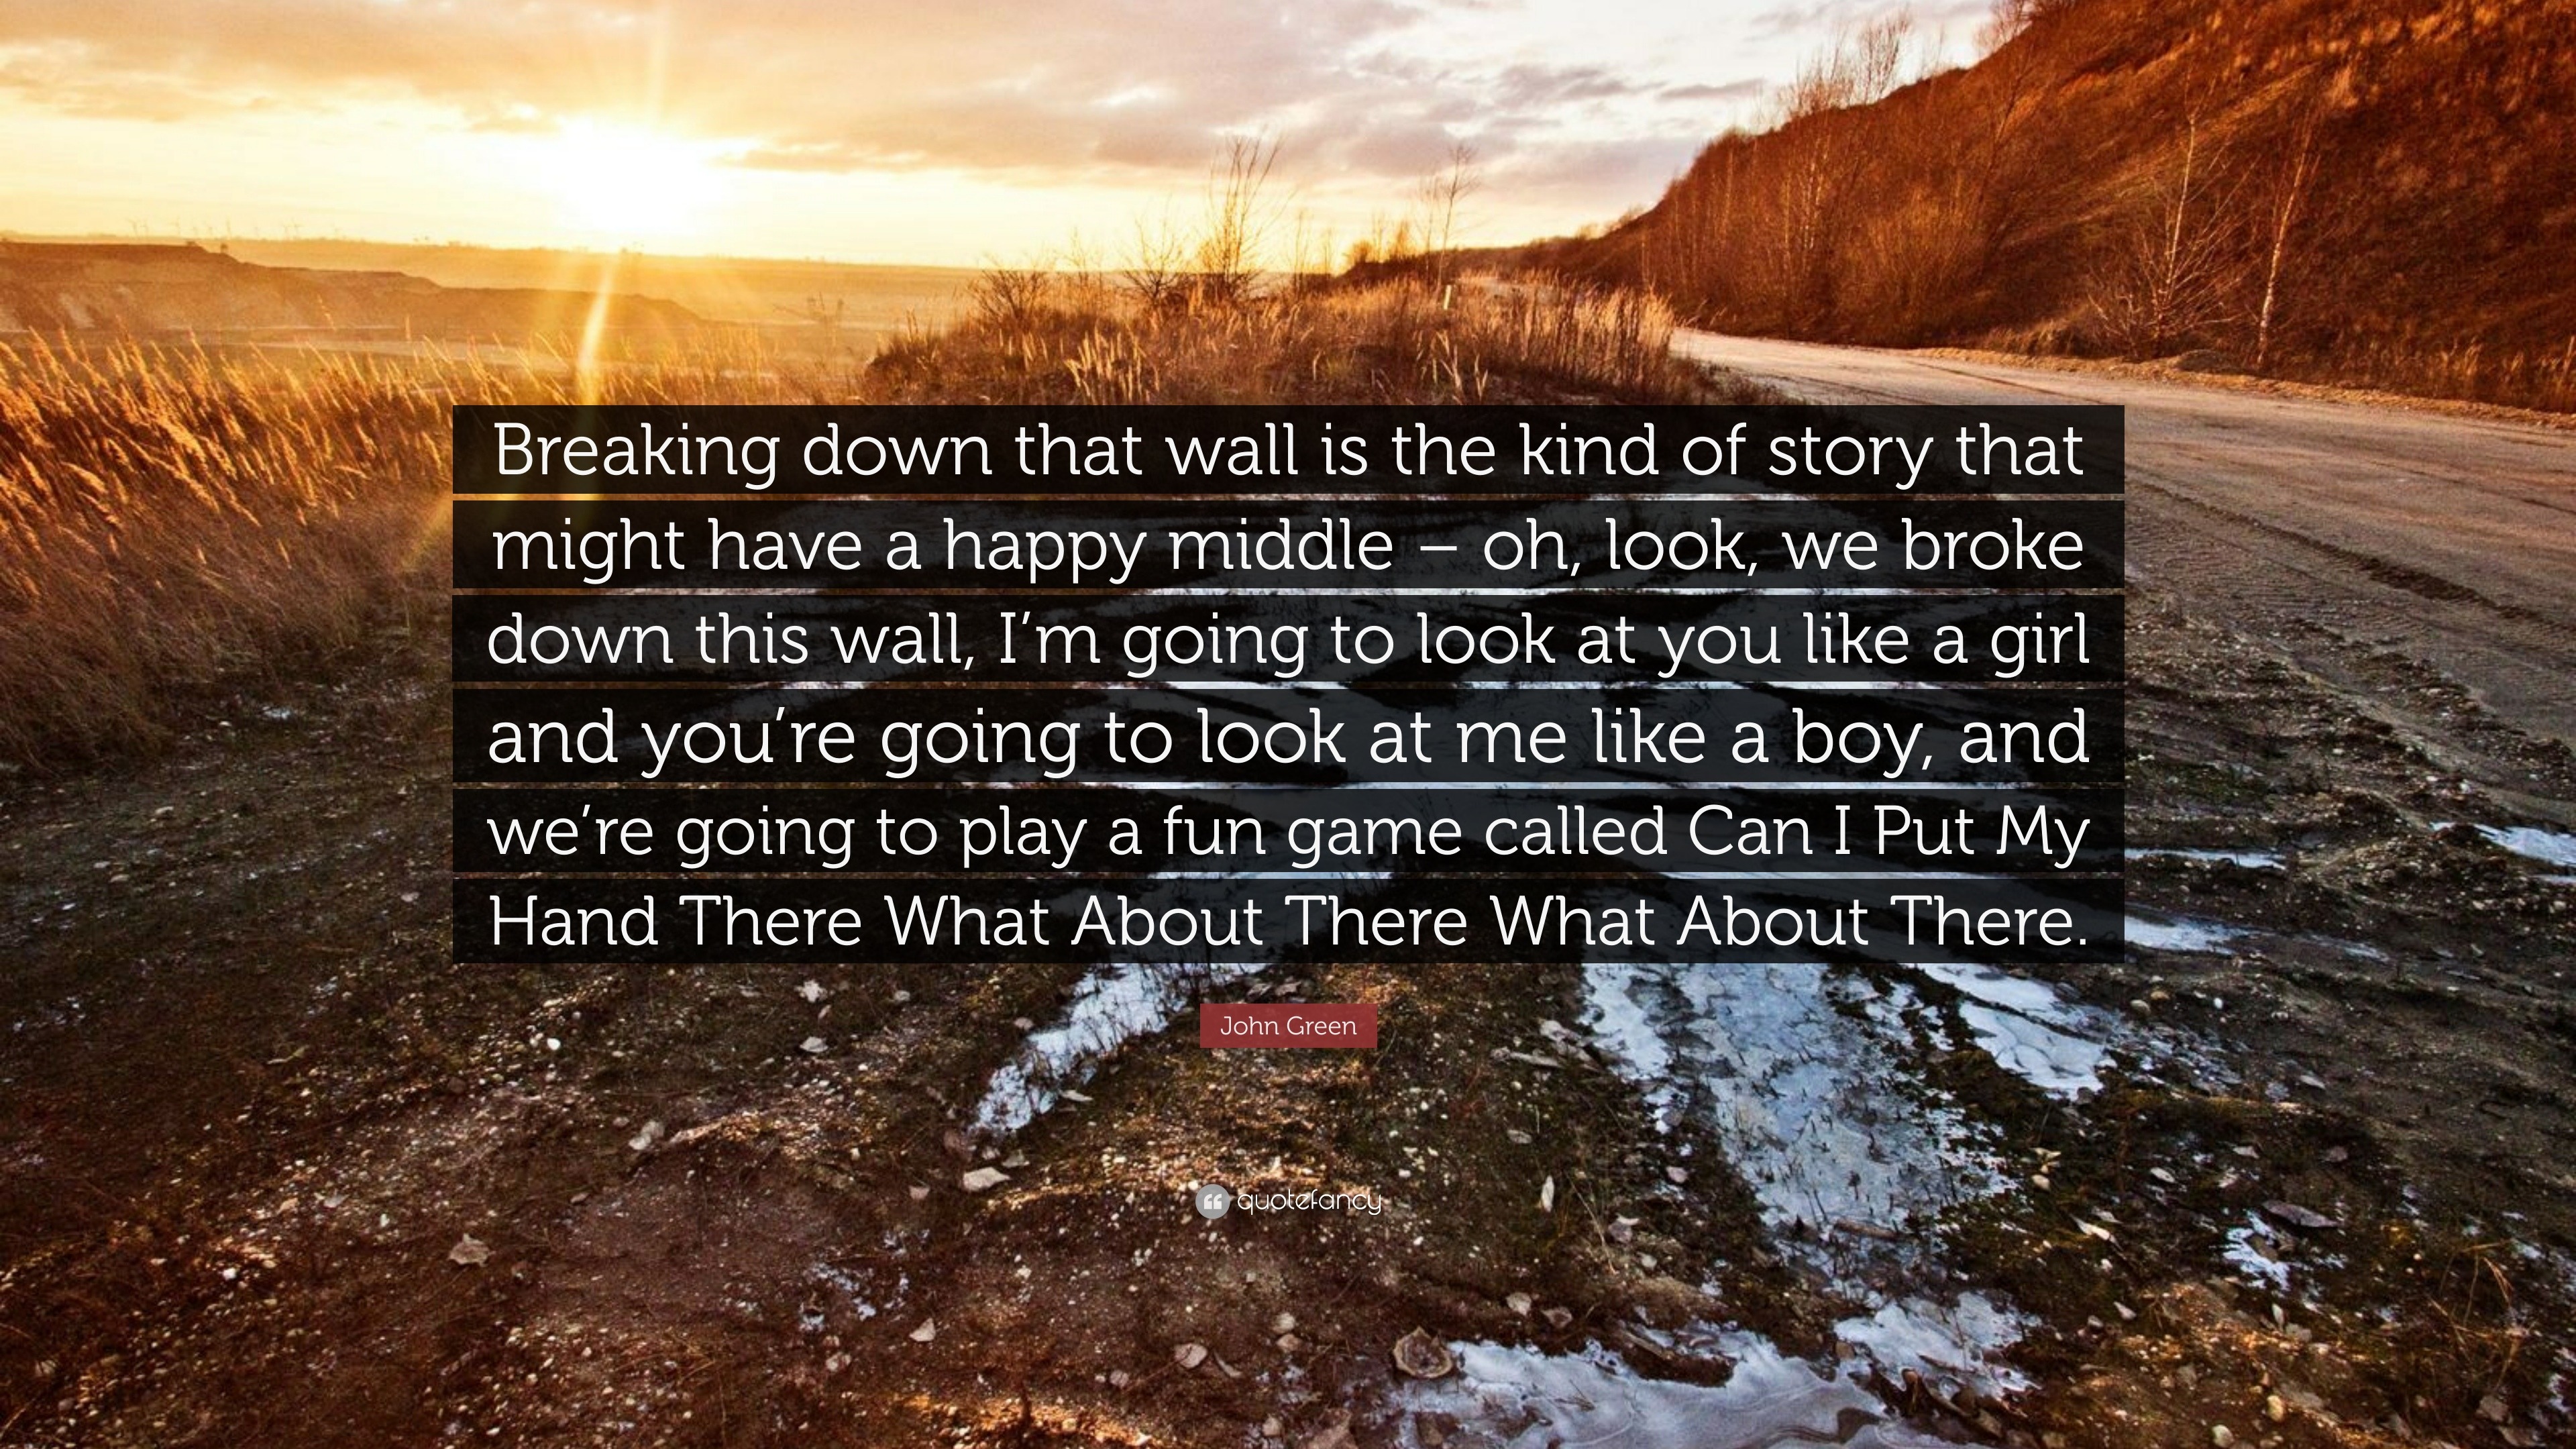 John Green Quote: “Breaking down that wall is the kind of story that